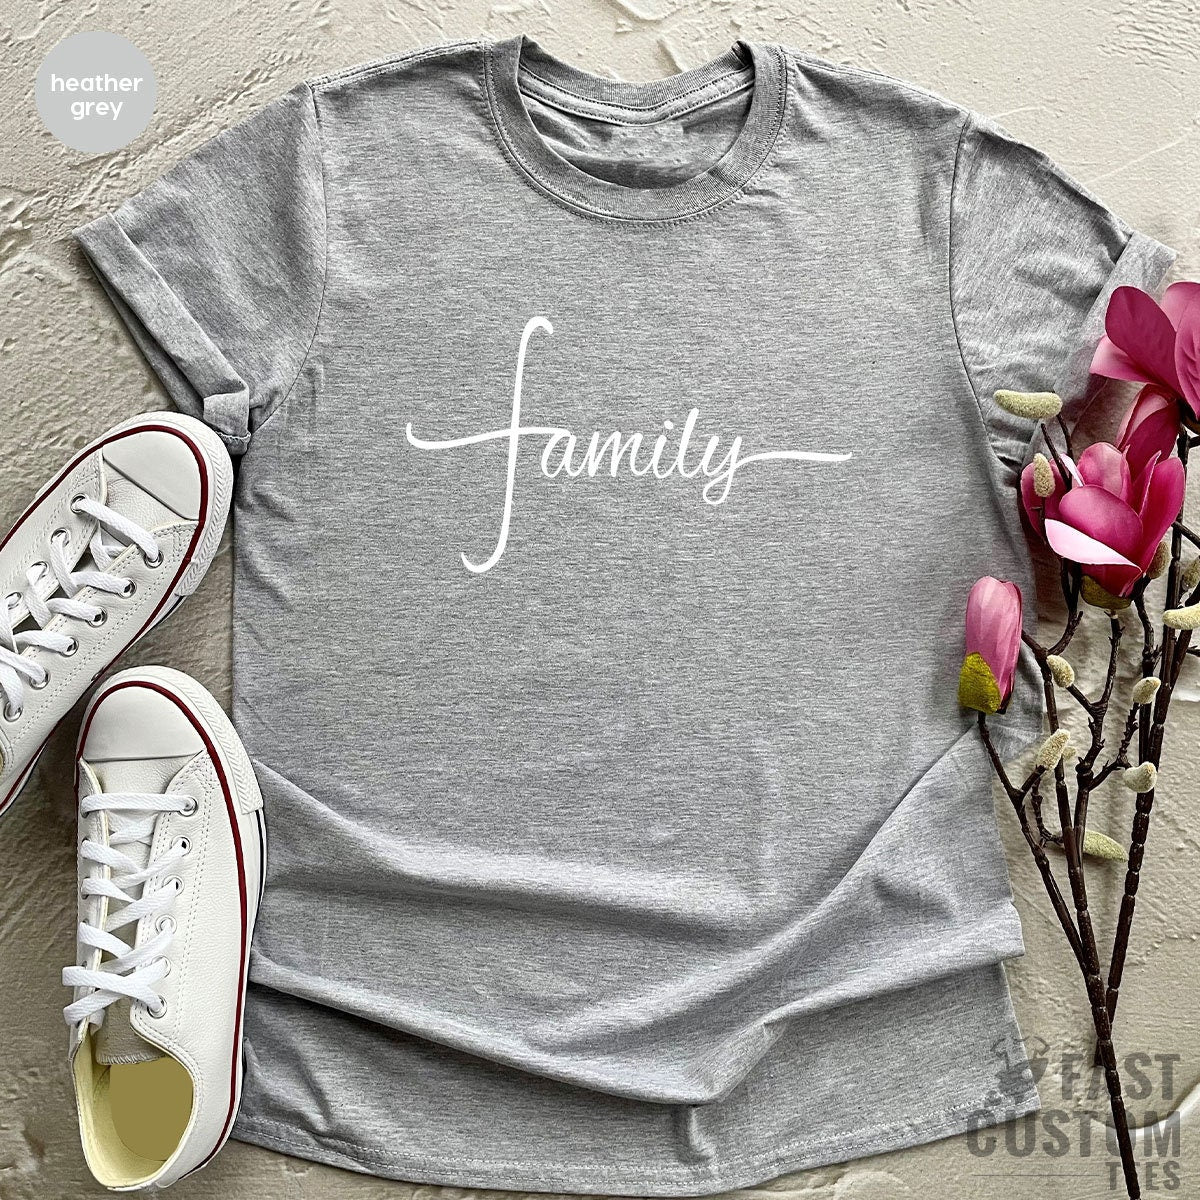 Family TShirt, Gift For Family, Family Reunion, Matching Family Tee, Family Gifts, Minimalist Family Shirt, Family TShirts, Custom Family - Fastdeliverytees.com